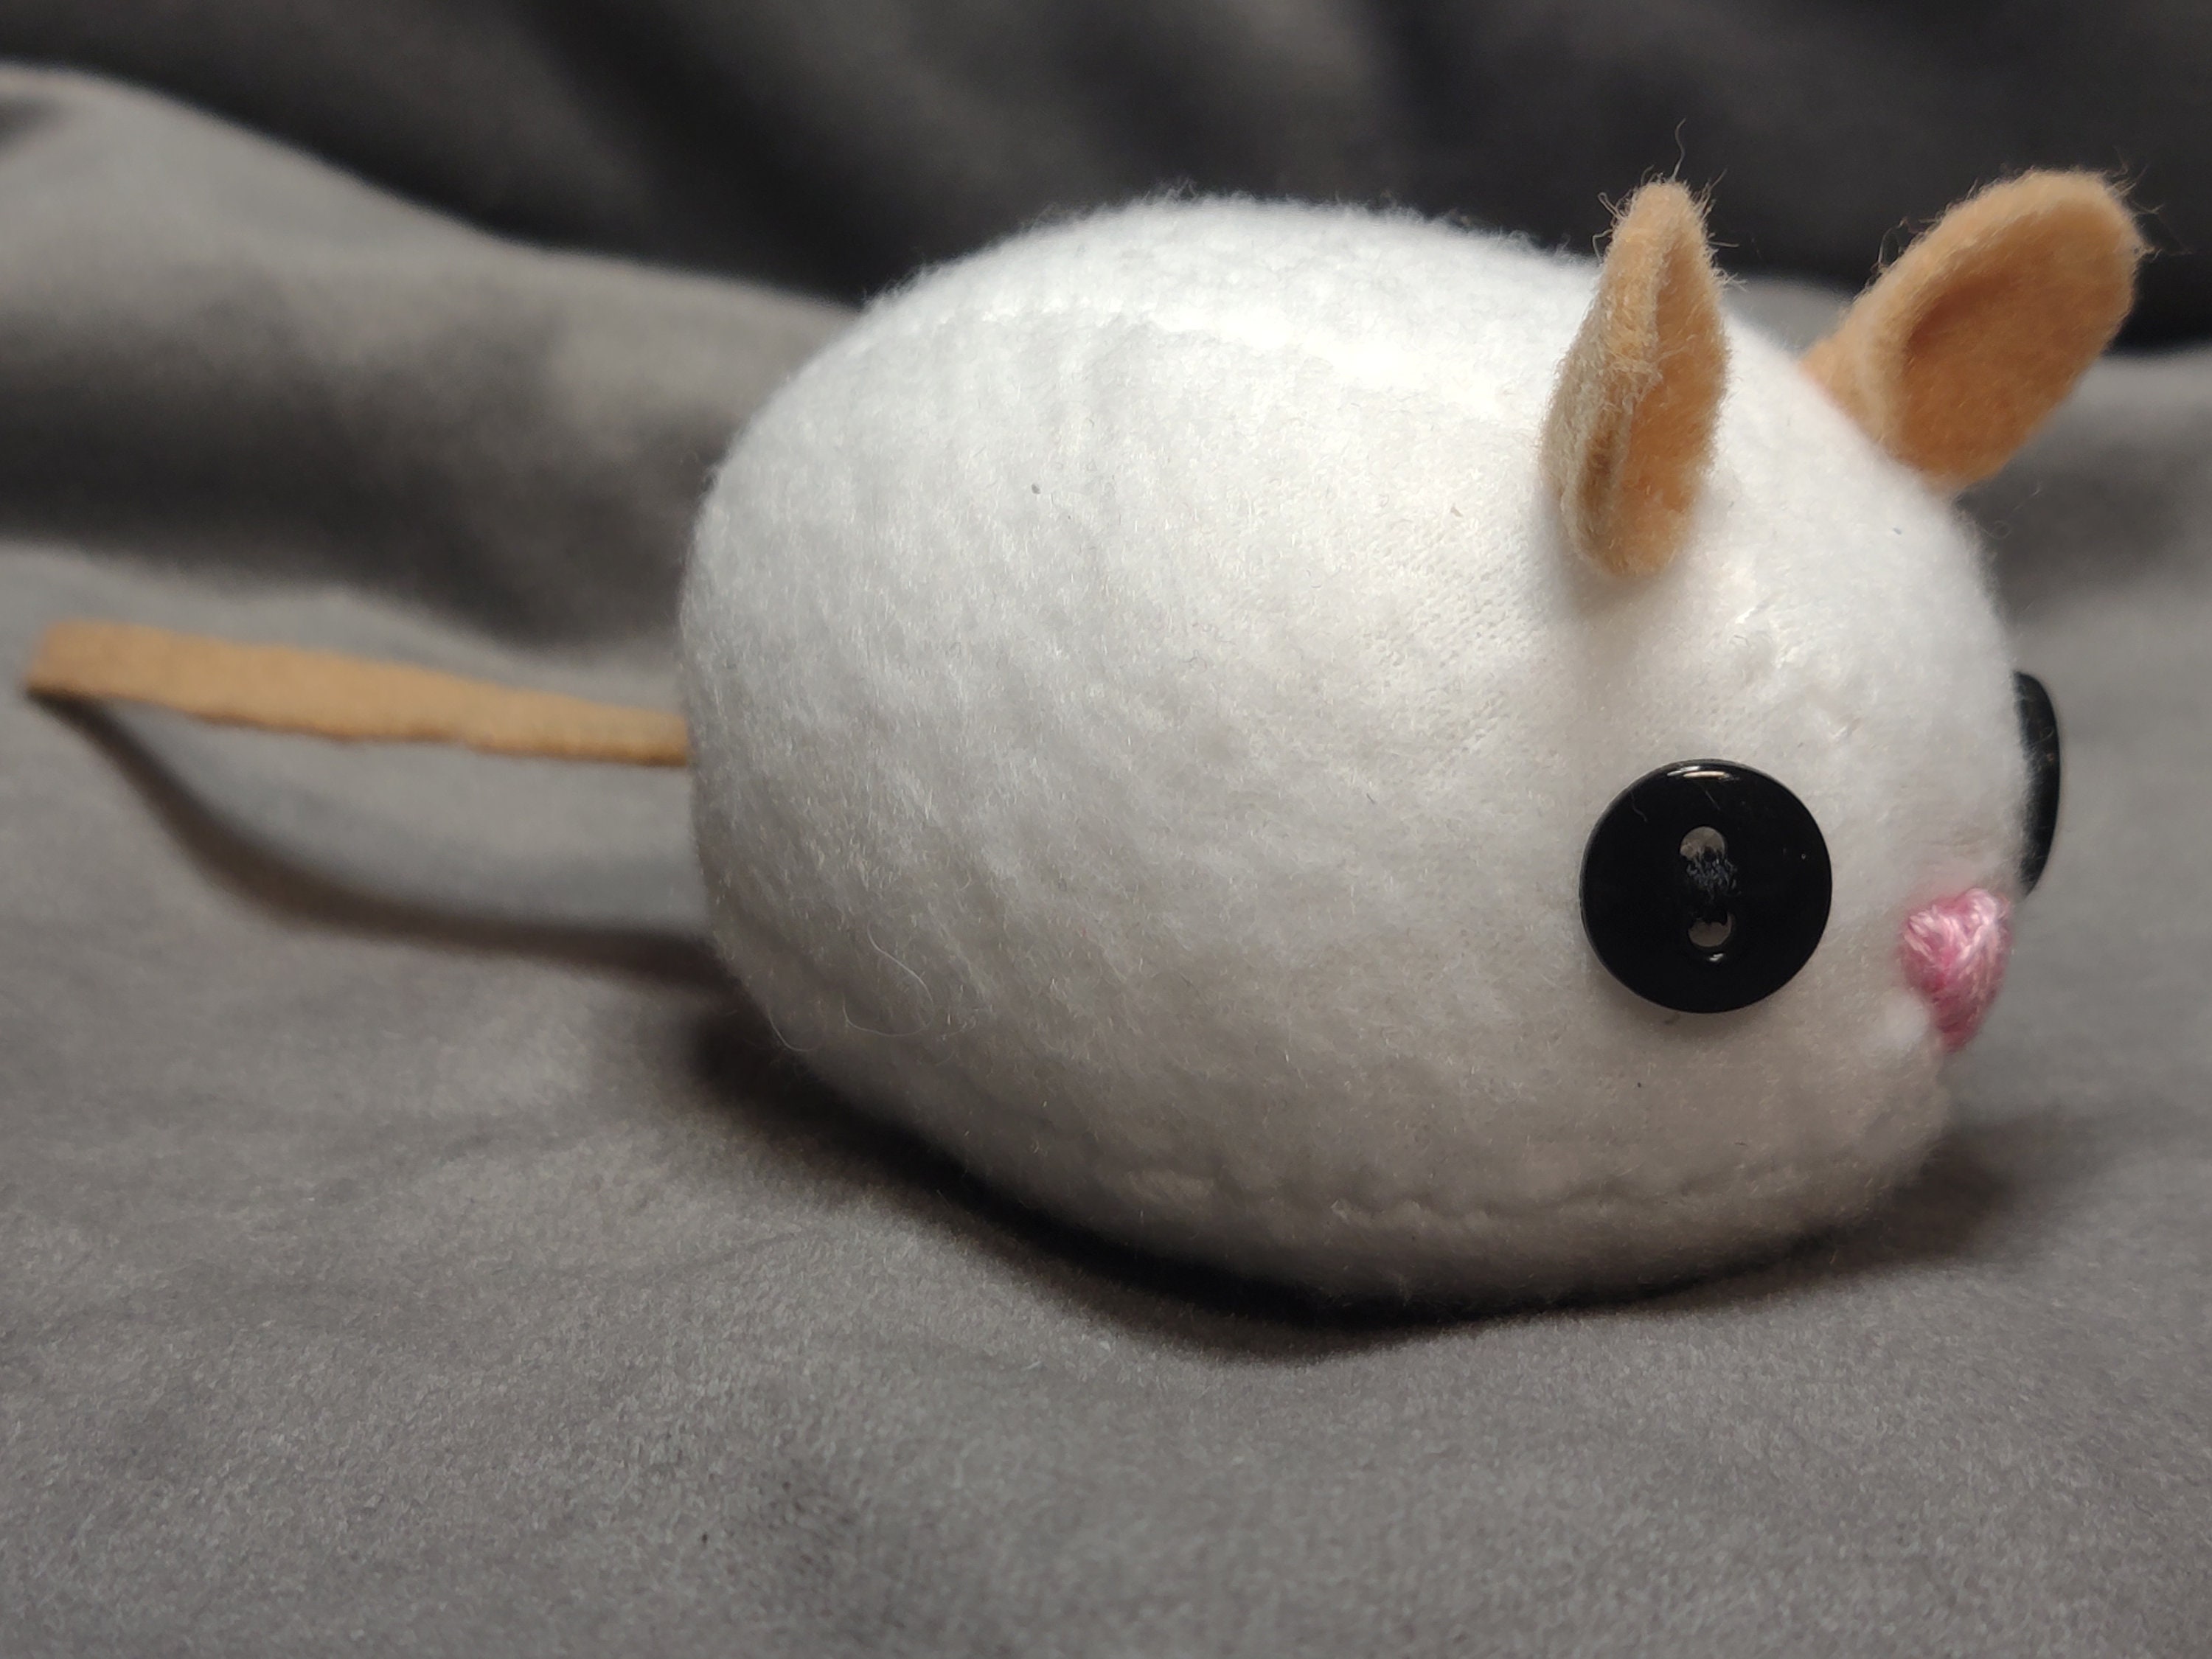 Buy Handmade Mouse Plush Stuffed Animal Toy Online in India - Etsy